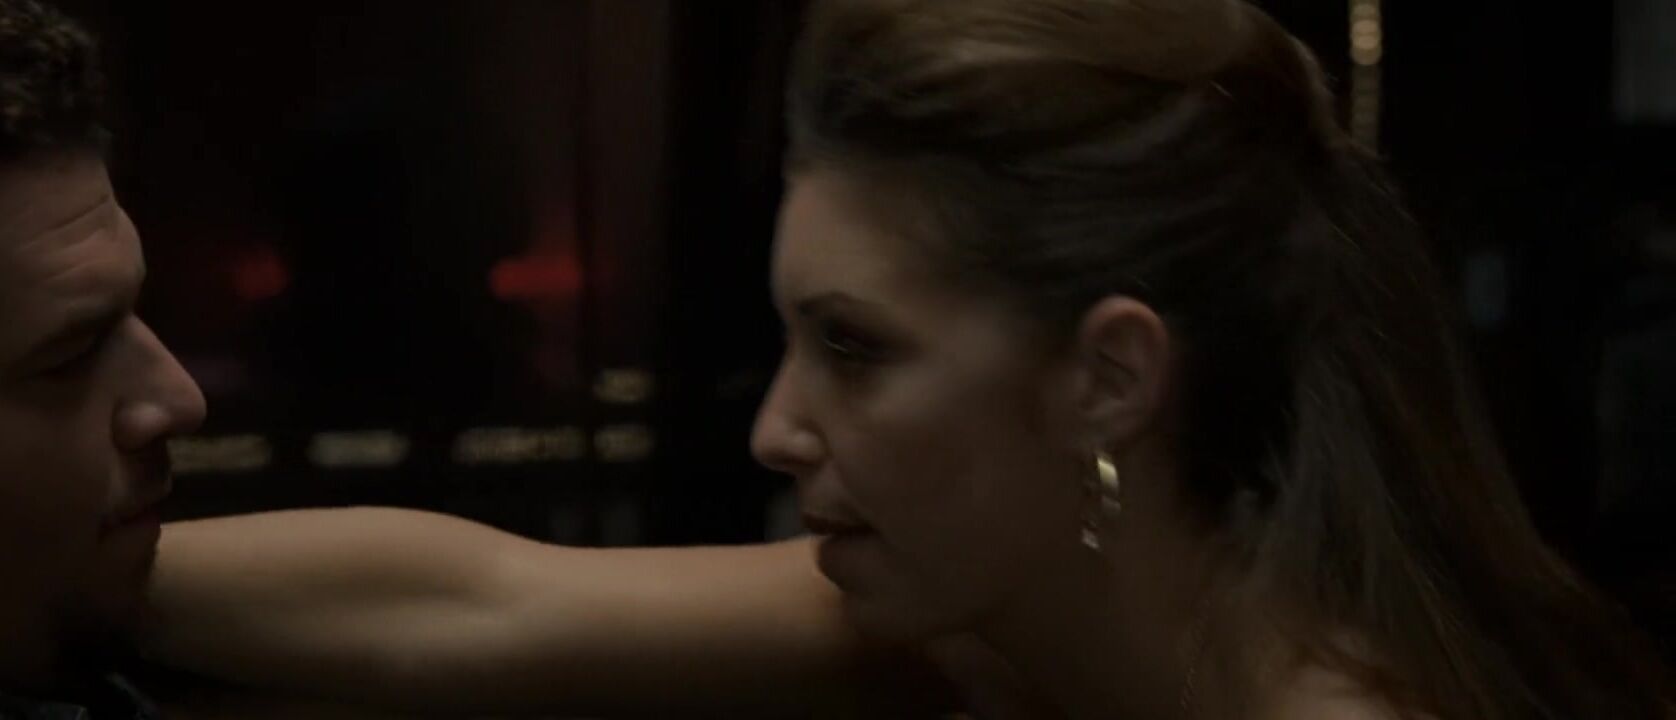 Innocent Bianca Kajlich is nympho who can't live without striptease in 30 Minutes or less (2011) Play